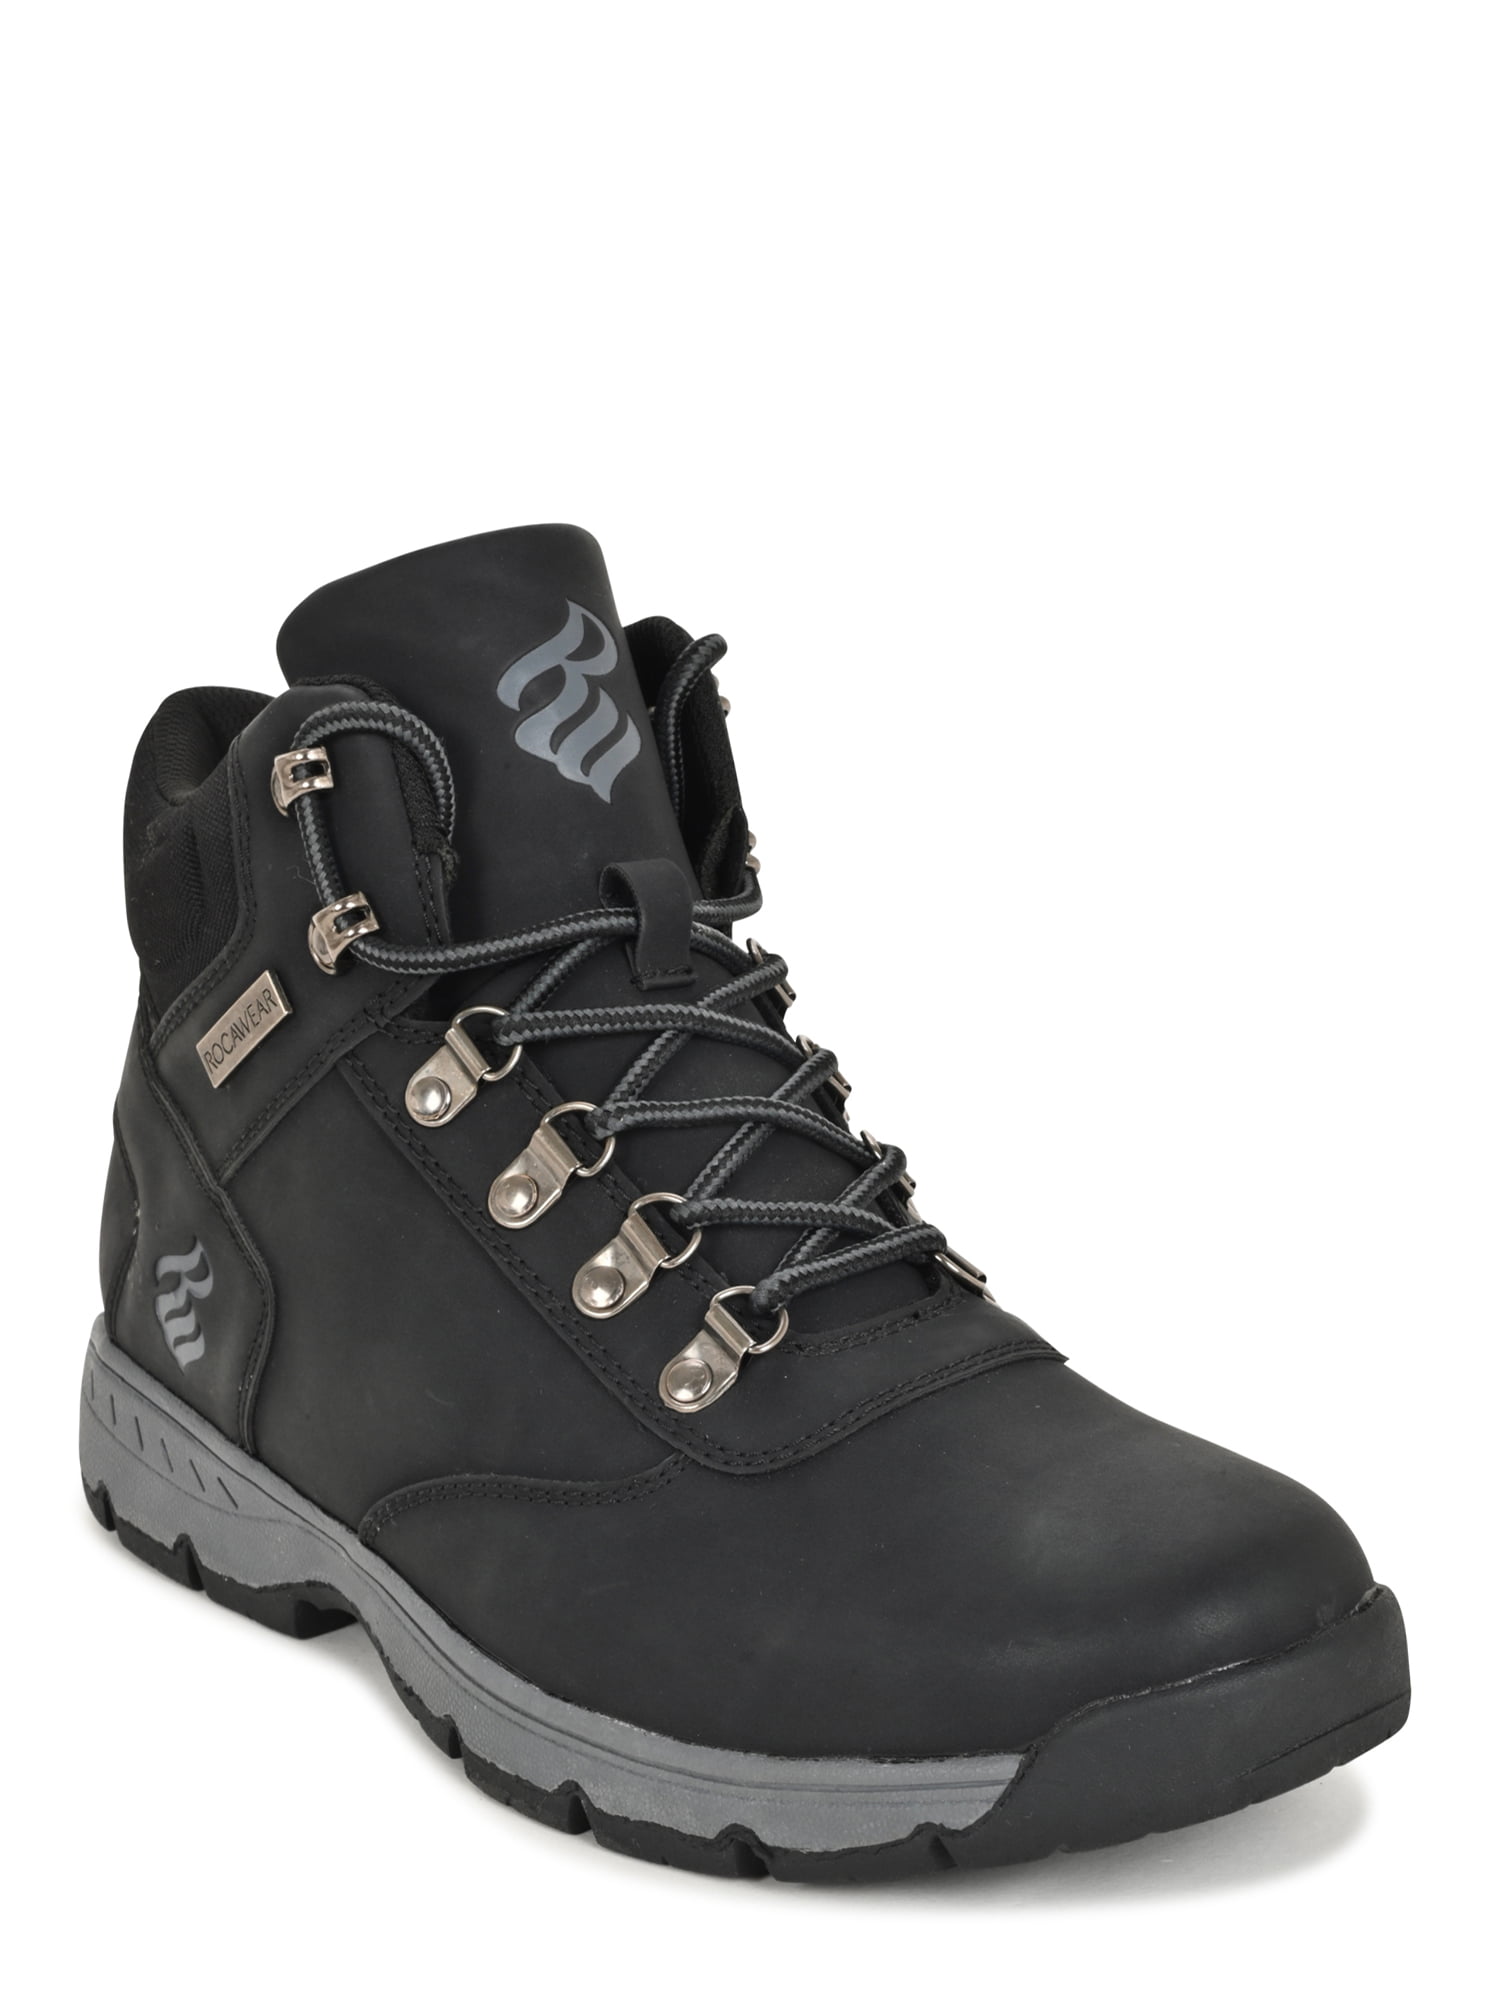 Rocawear Men's Bryant Casual Lace-up Boot - Walmart.com